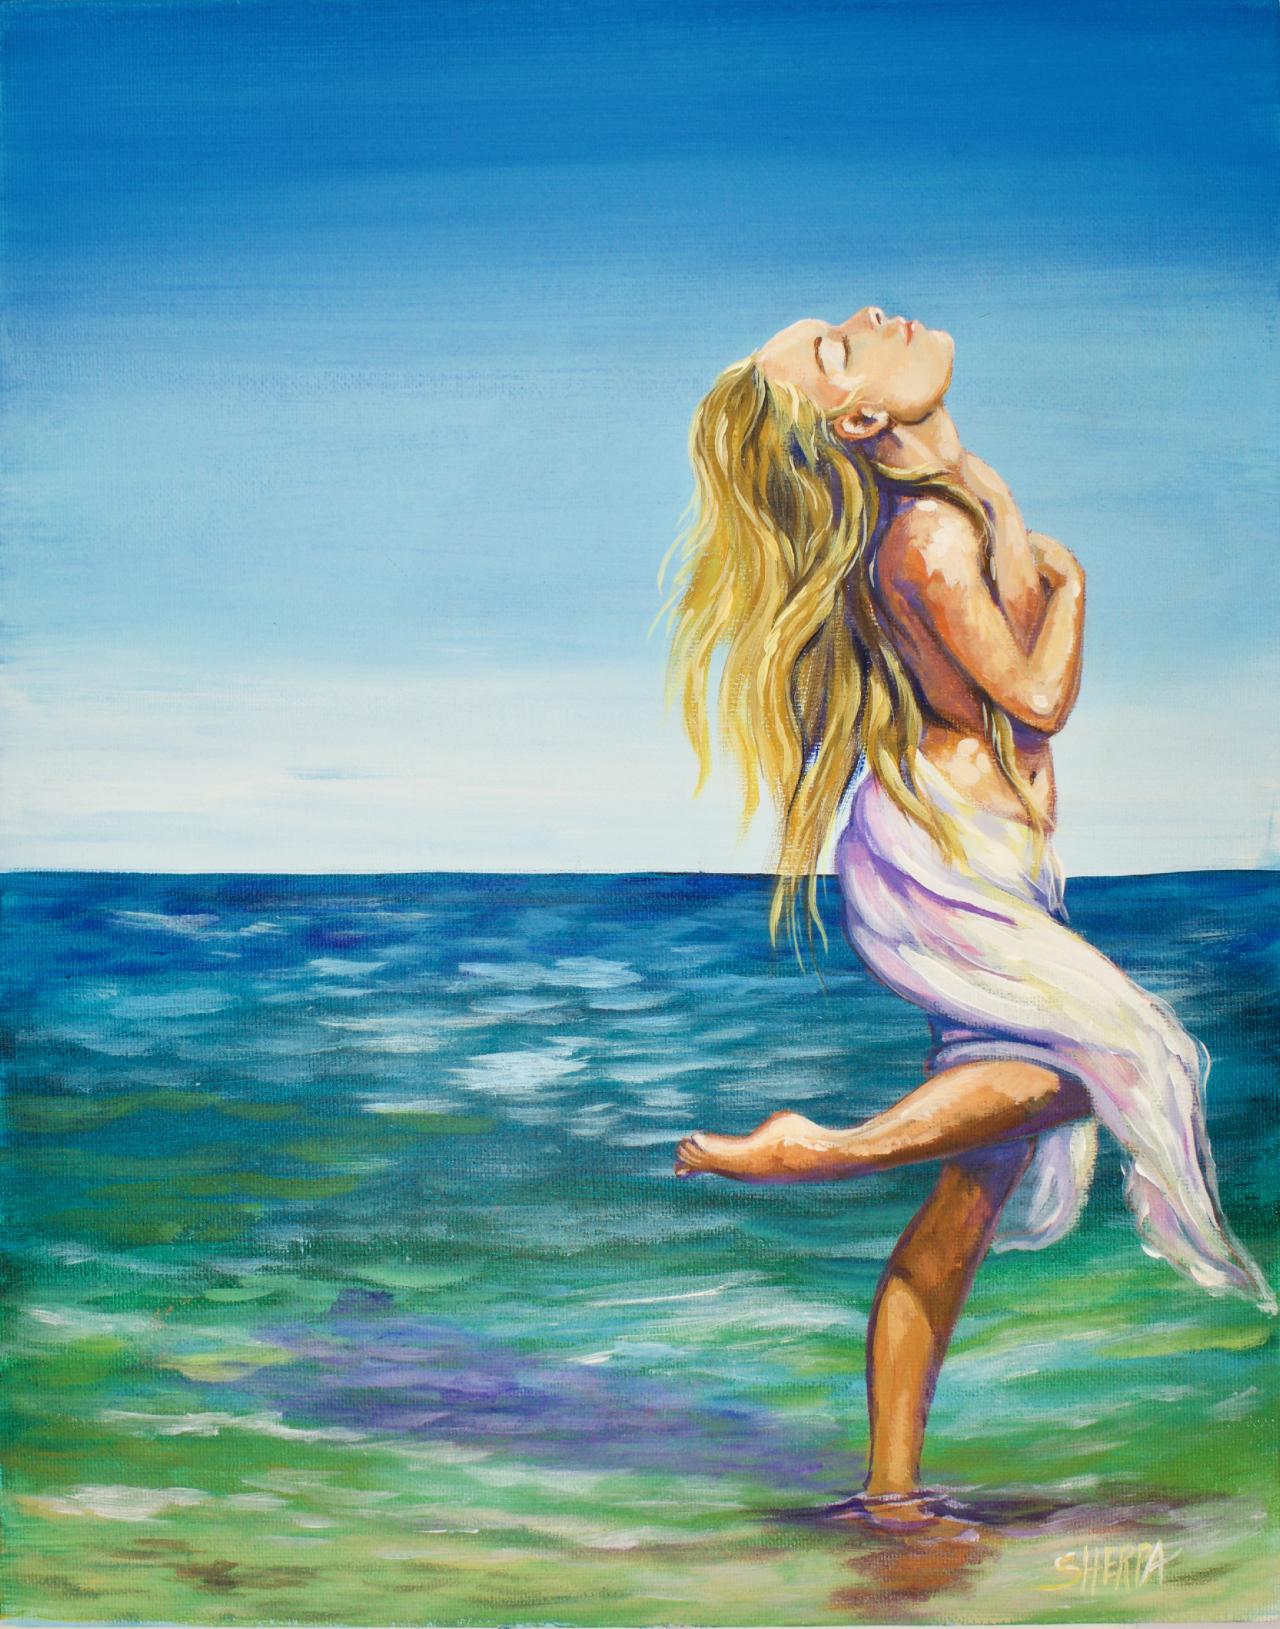 Girl In The Ocean Acrylic Painting The Art Sherpa Gallery The Art Sherpa Community The Art Sherpa